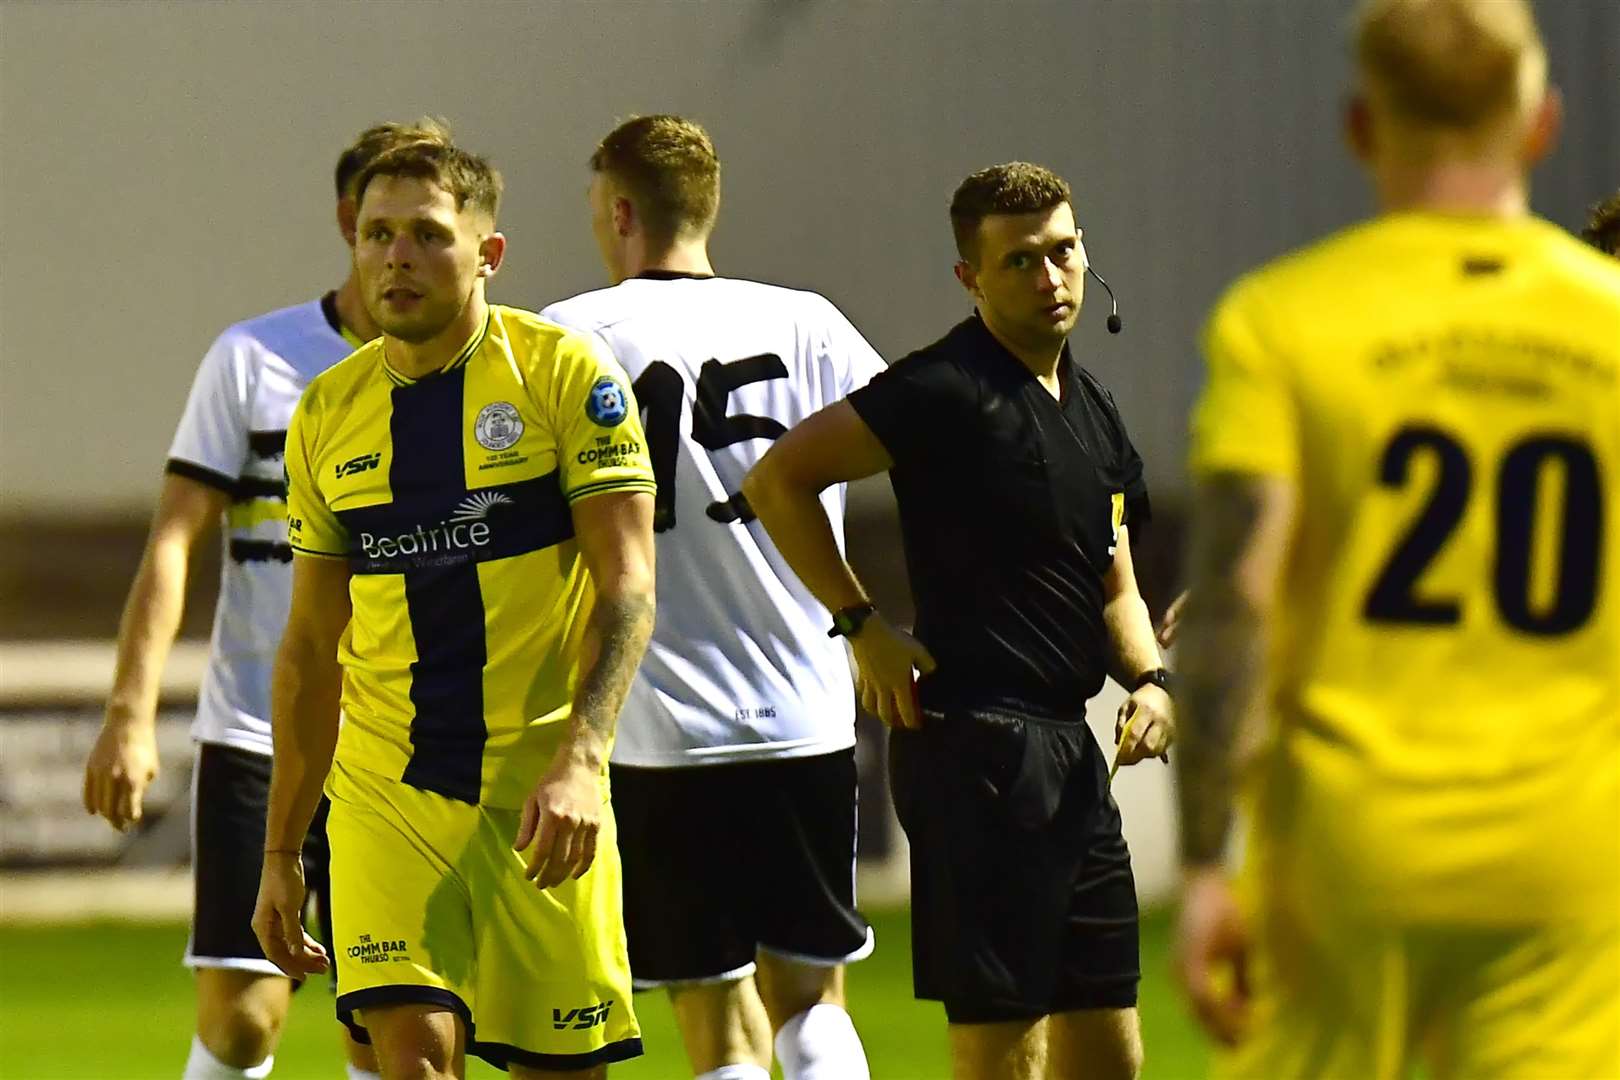 Wick Academy's Jack Henry walks off after receiving a second yellow card from referee David Alexander. Picture: Mel Roger